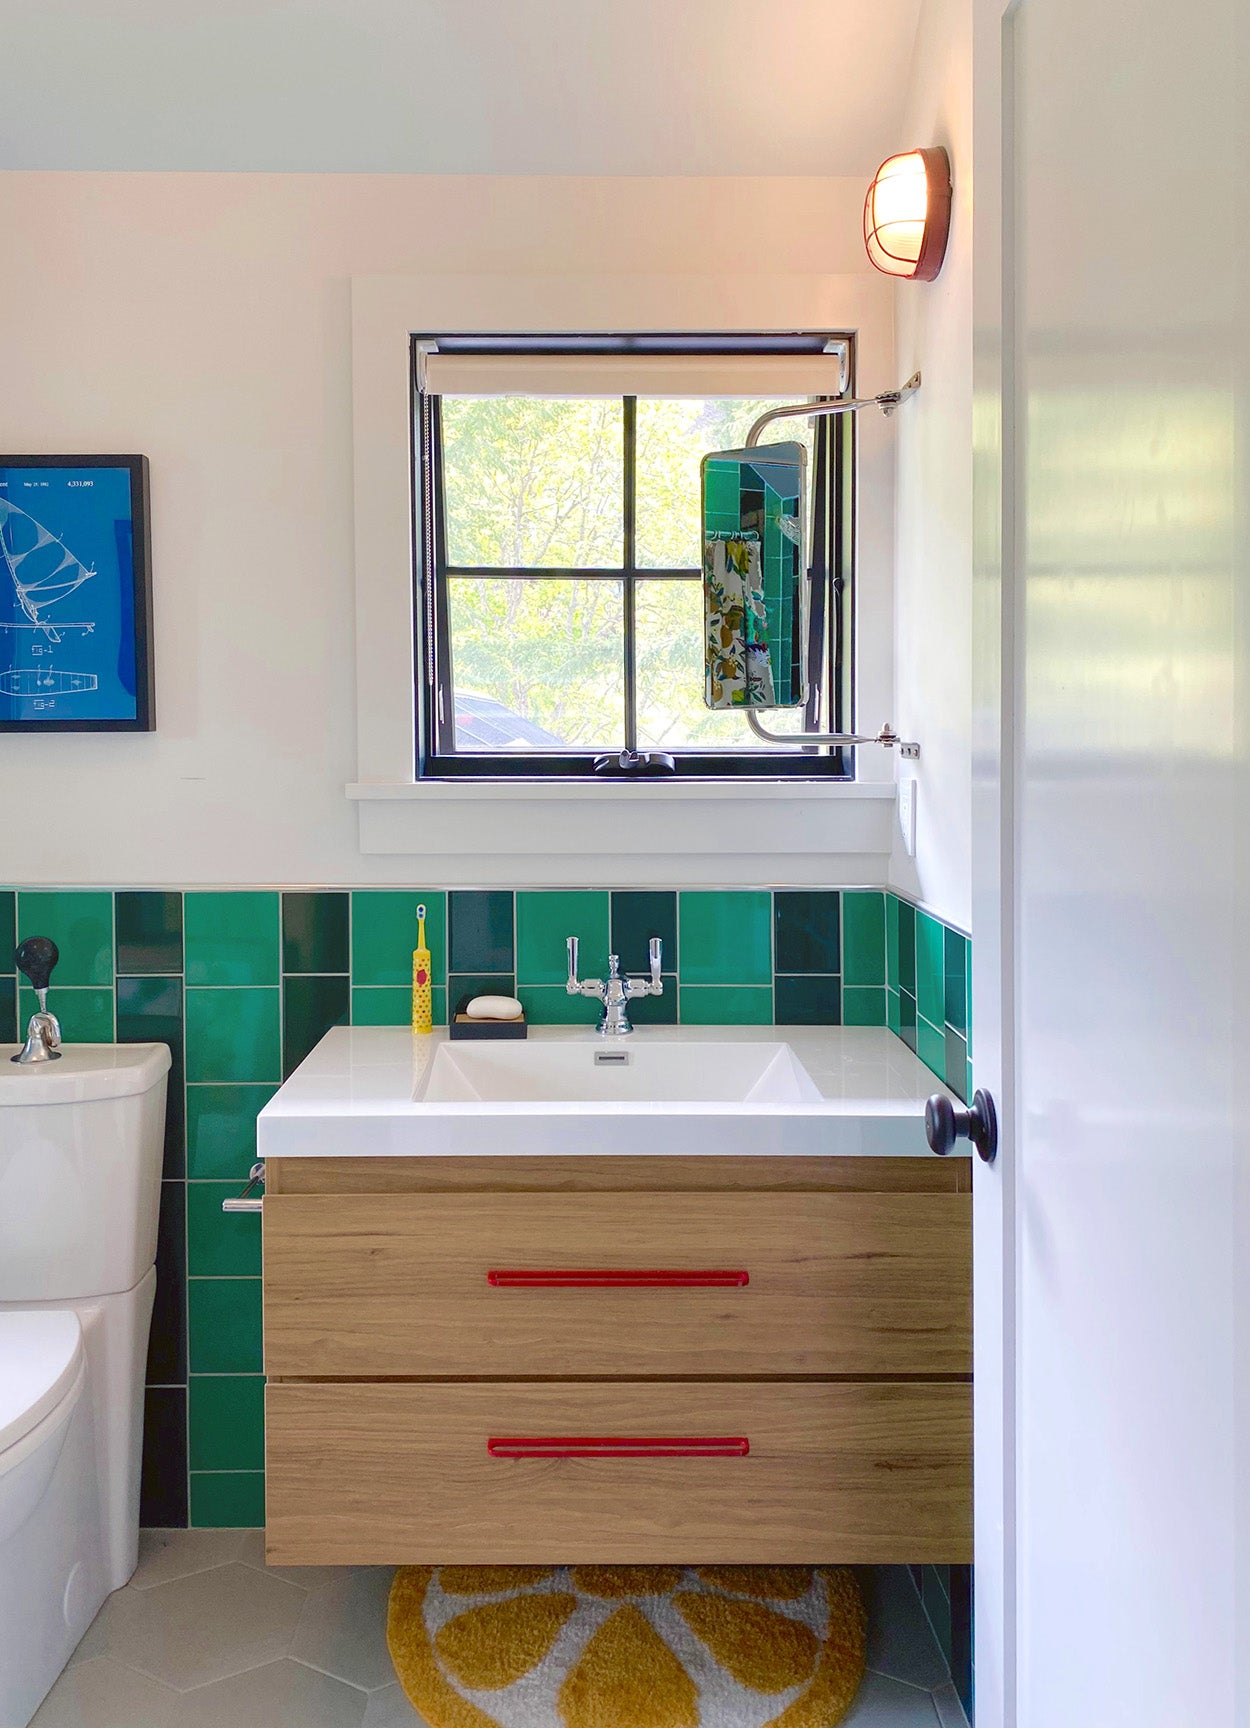 This Oregon Home Reinvents Rustic With Green Tile Stripes and Allover Rainbow Plaid